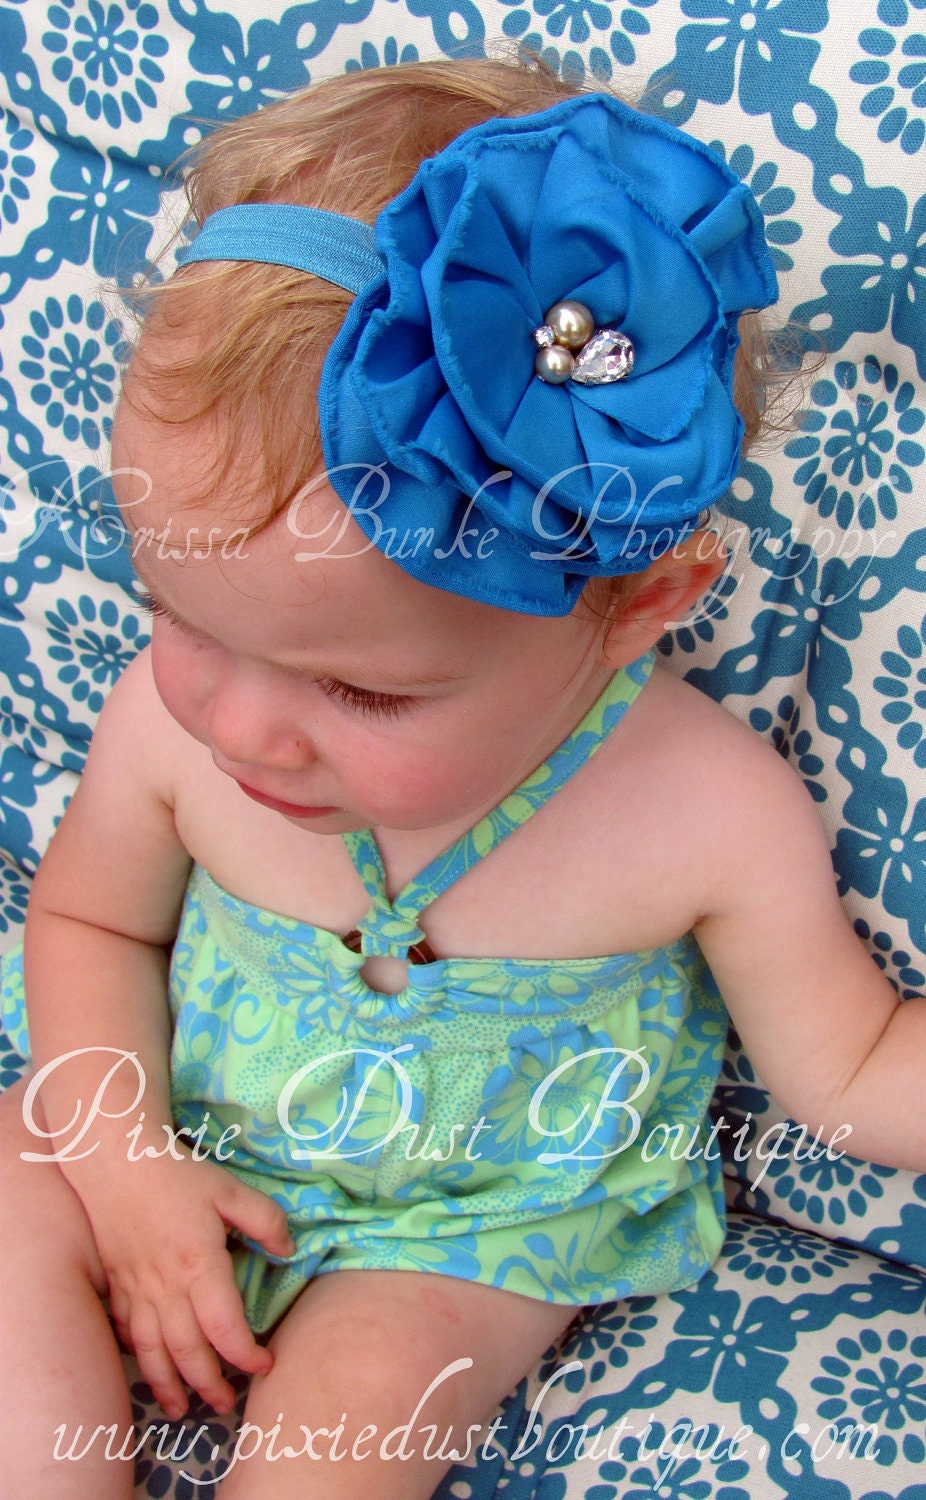 Baby/Infant/toddler Headband-Bright blue flower headband embellished with pearls and rhinestones